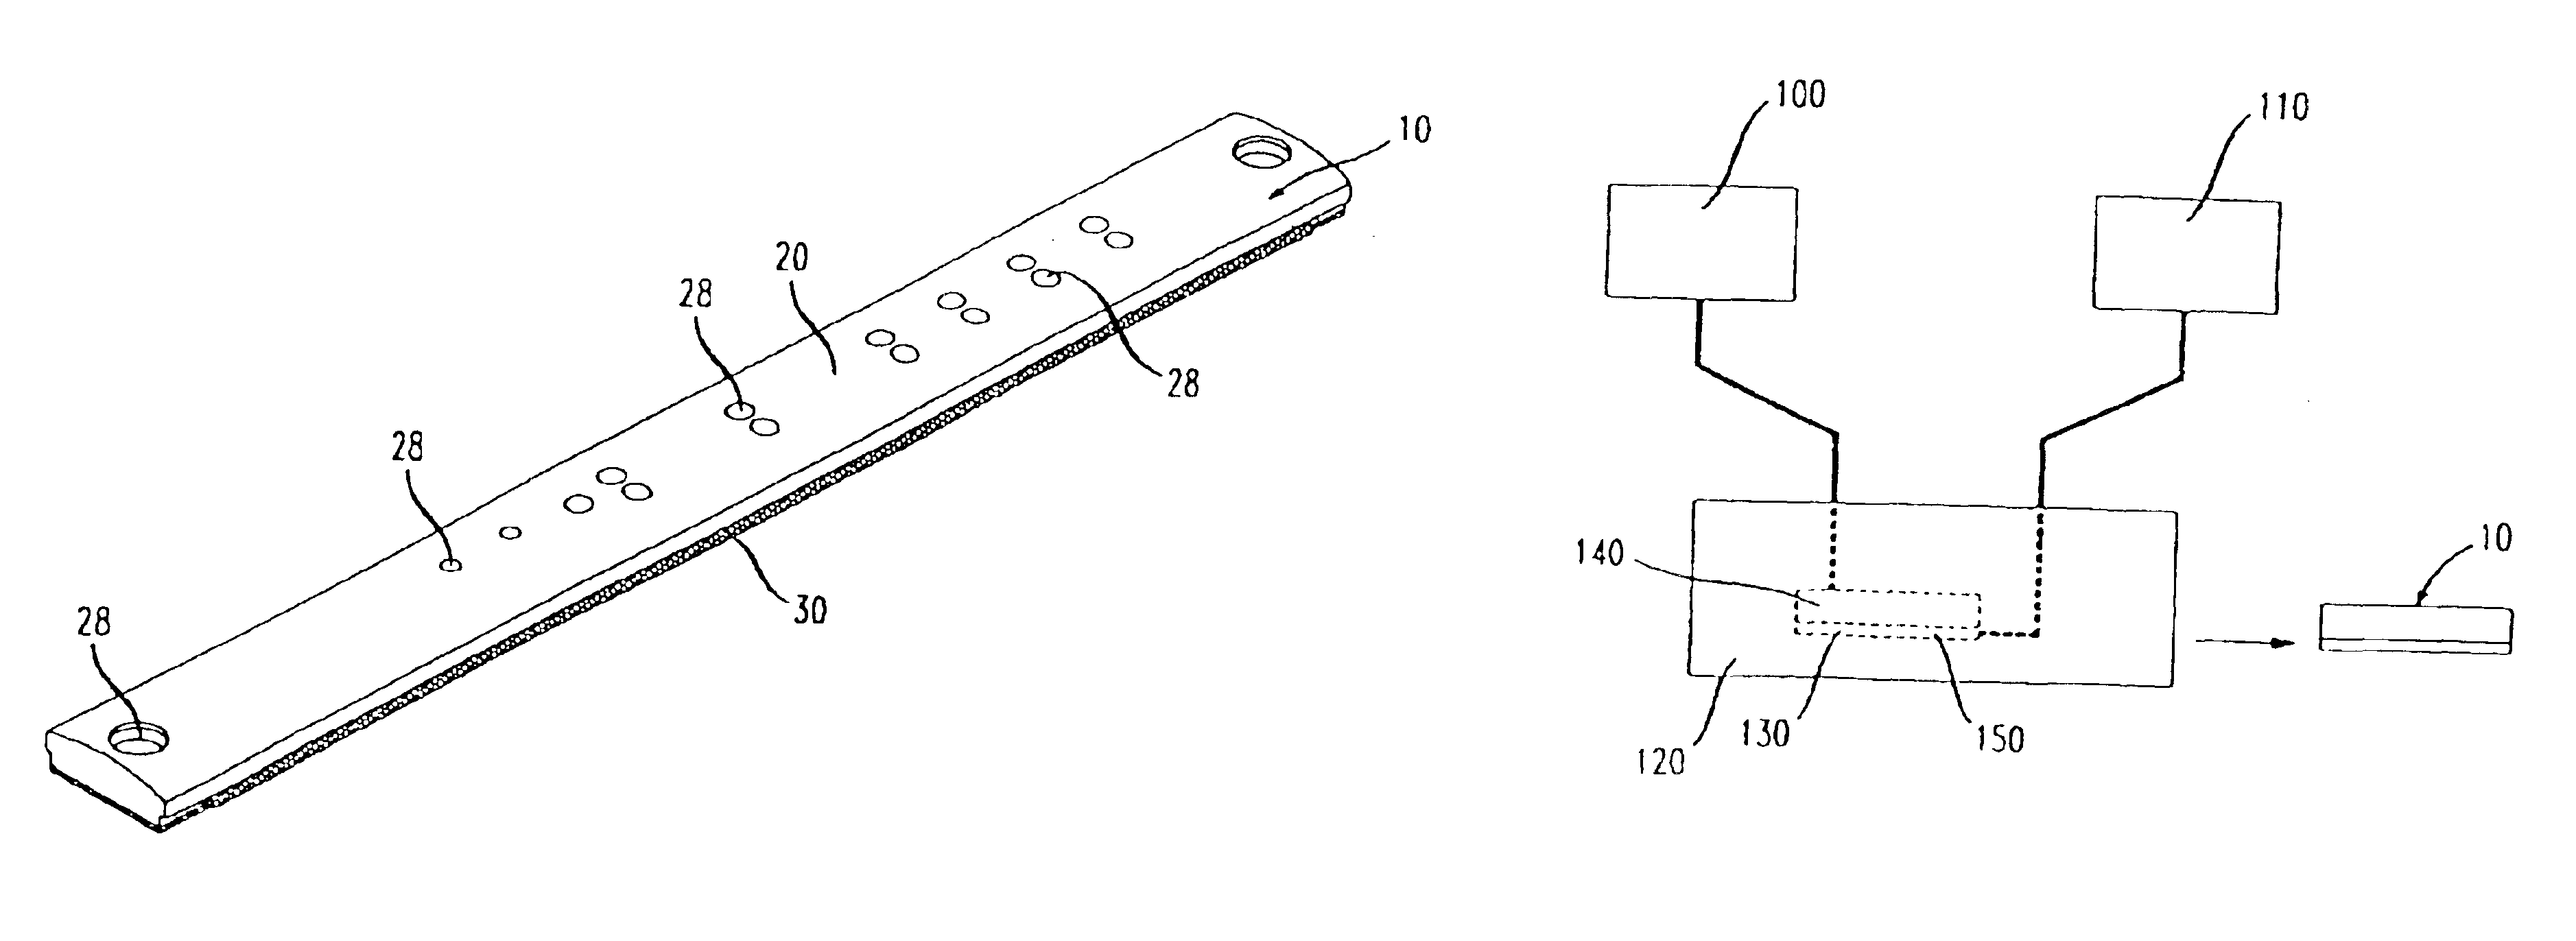 Device and method of forming a unitary electrically shielded panel